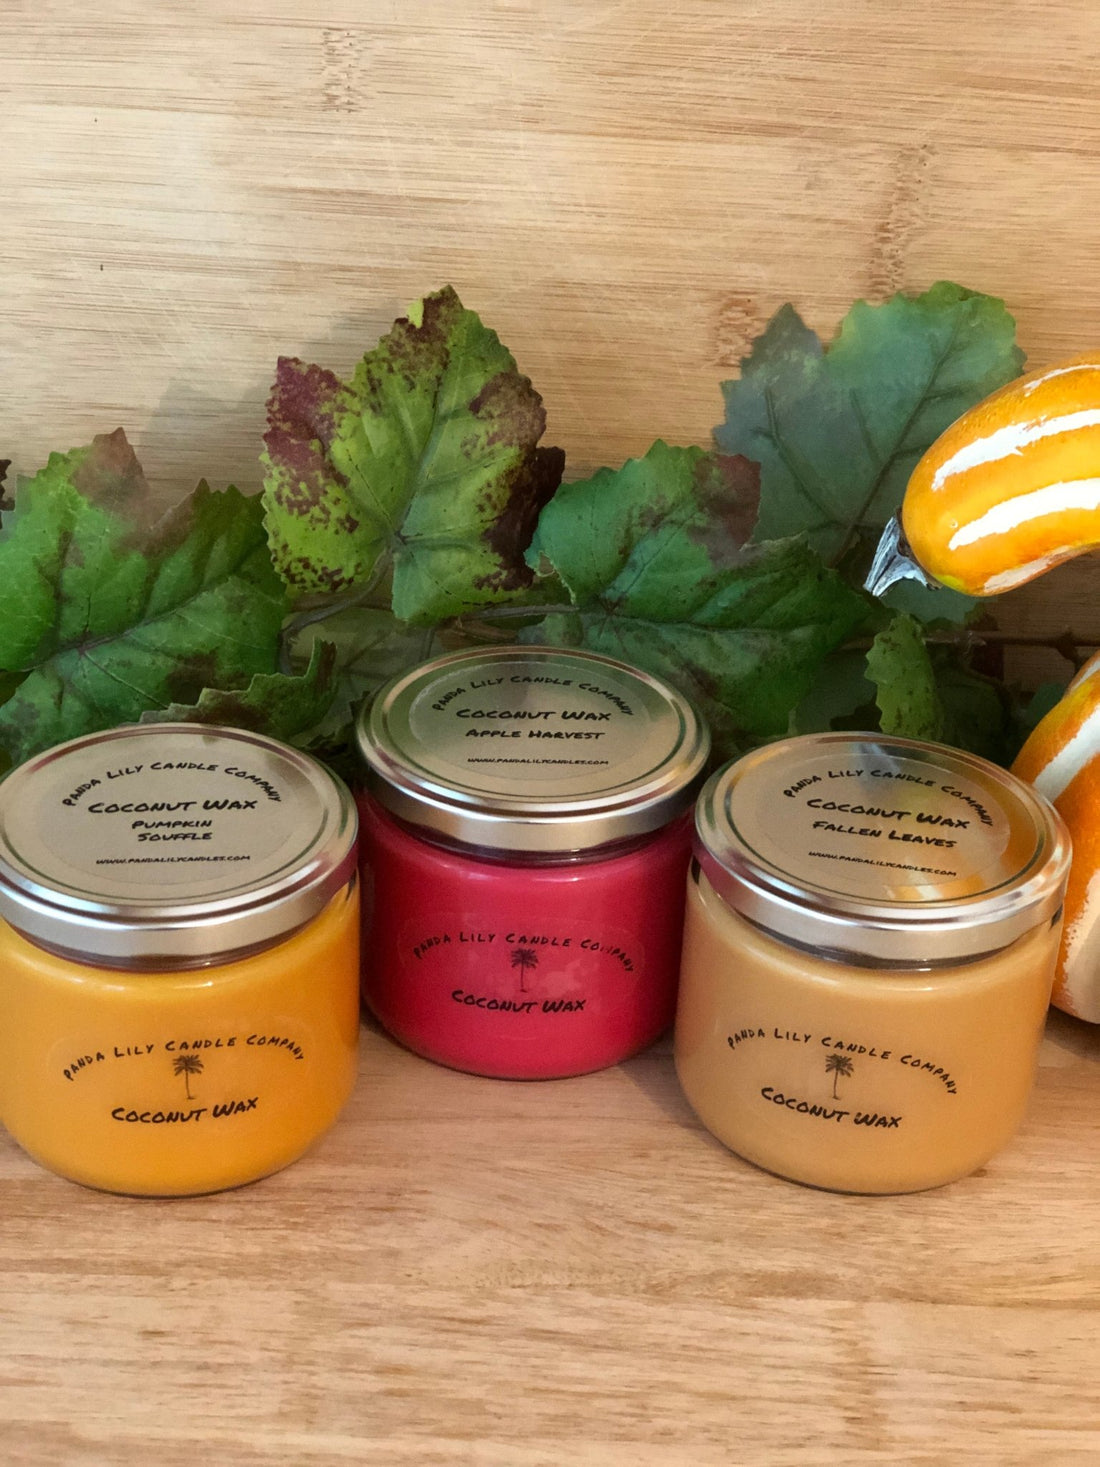 Coconut Wax Fall Candles - Panda Lily Candle Company